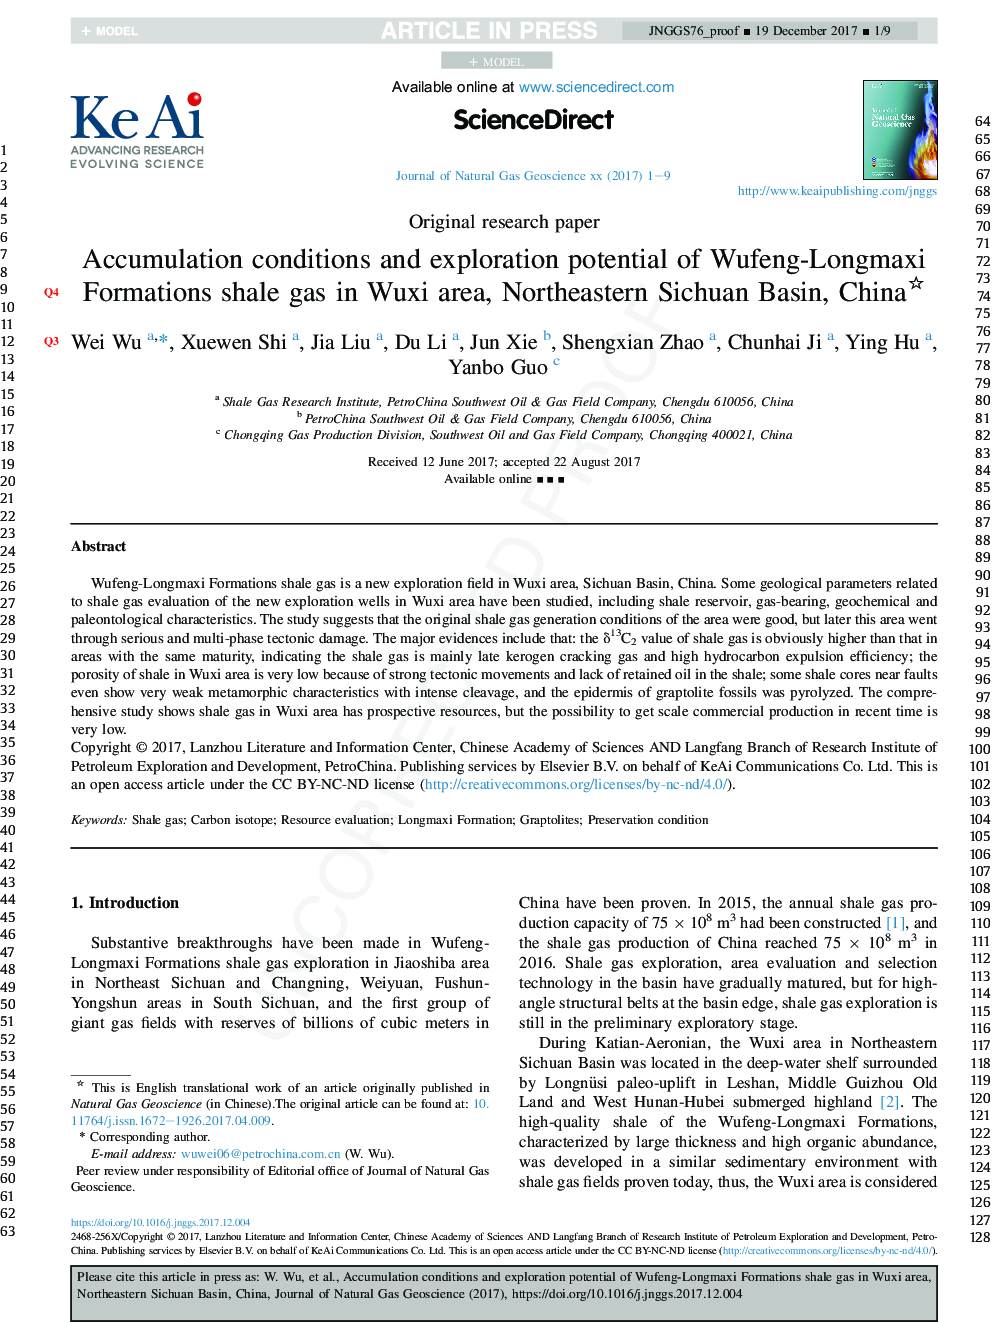 Accumulation conditions and exploration potential of Wufeng-Longmaxi Formations shale gas in Wuxi area, Northeastern Sichuan Basin, China